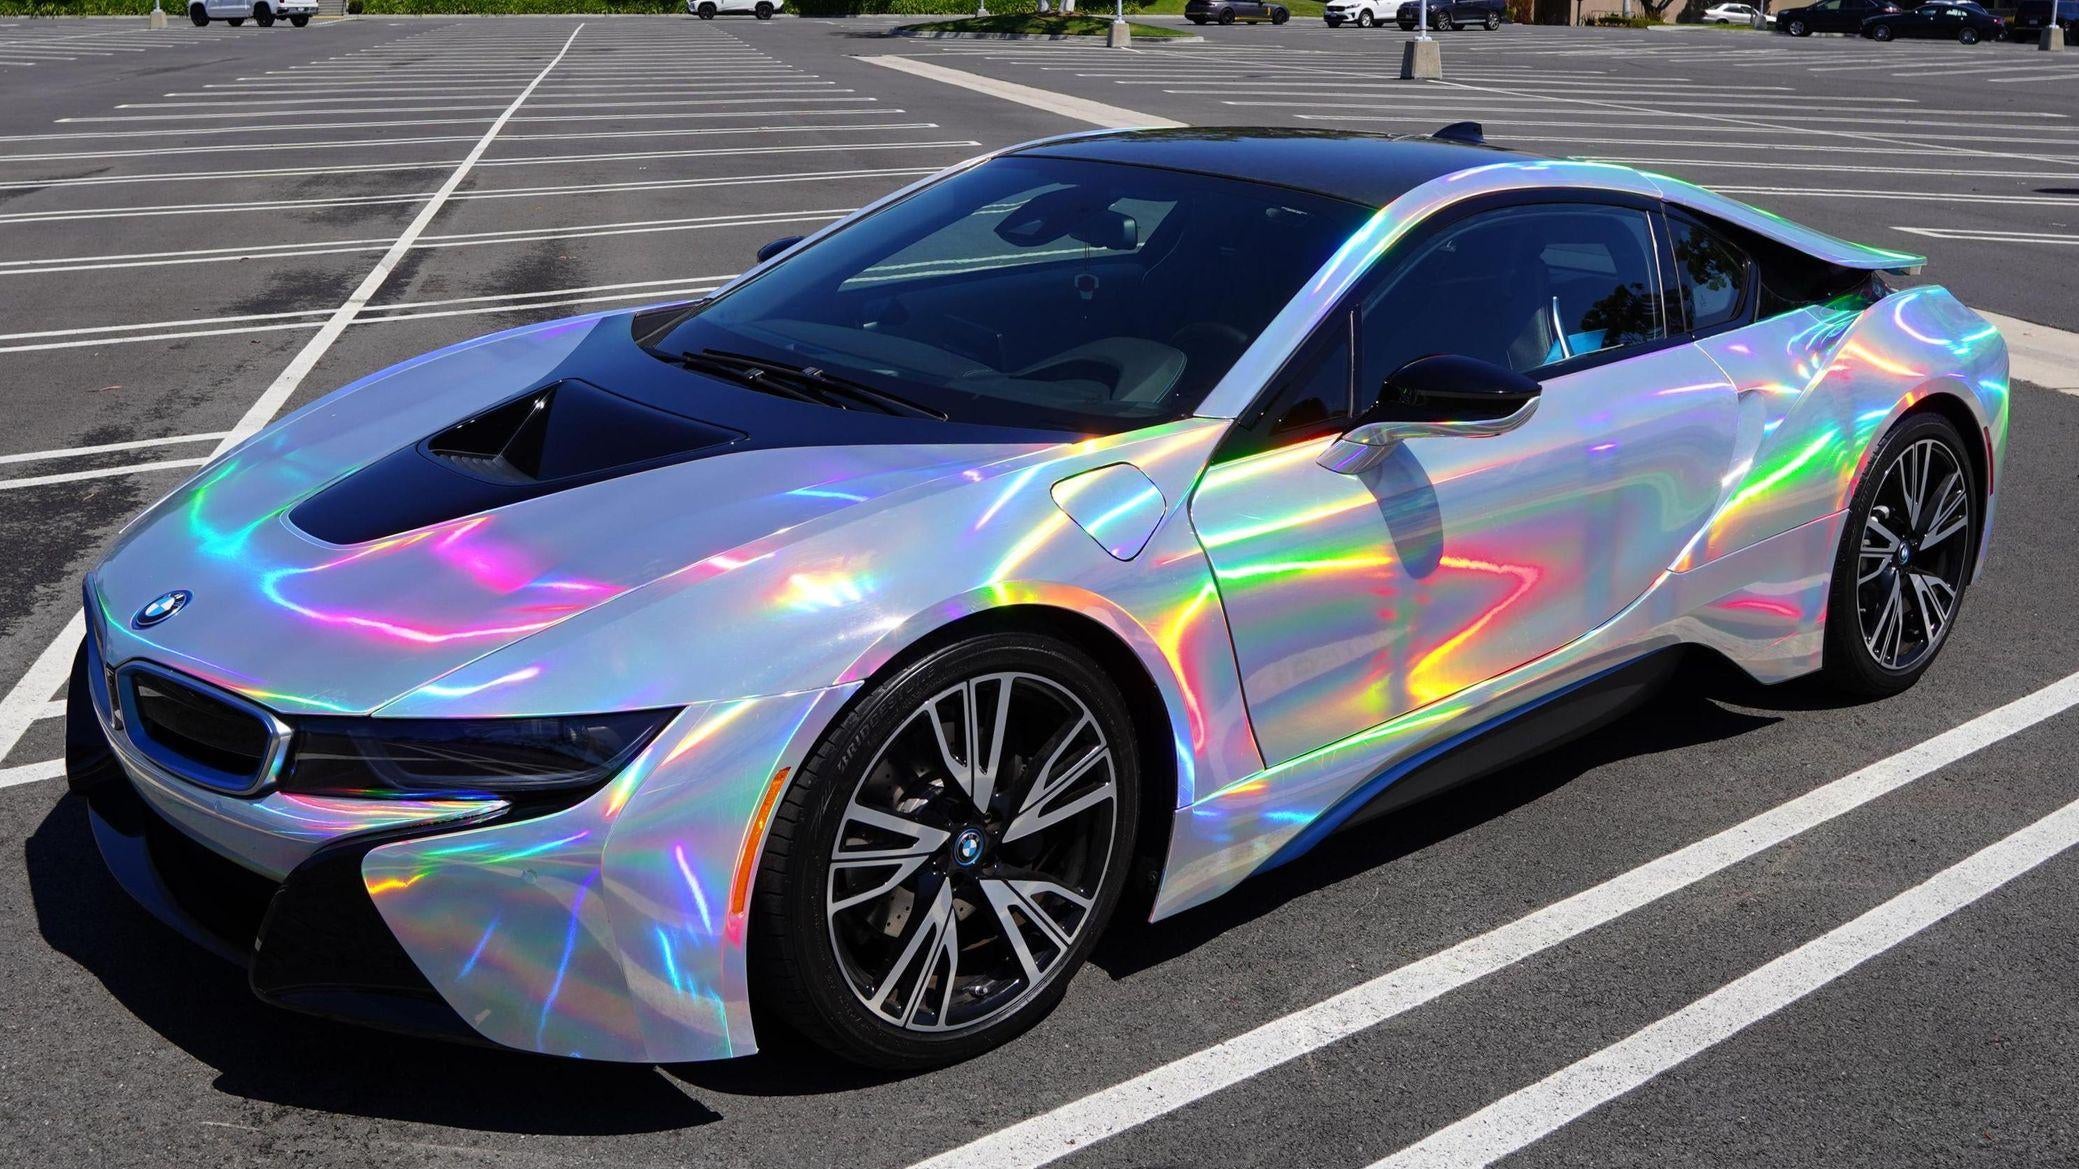 Embrace Your Inner Paris Hilton With This Holographic BMW i8 [Video]